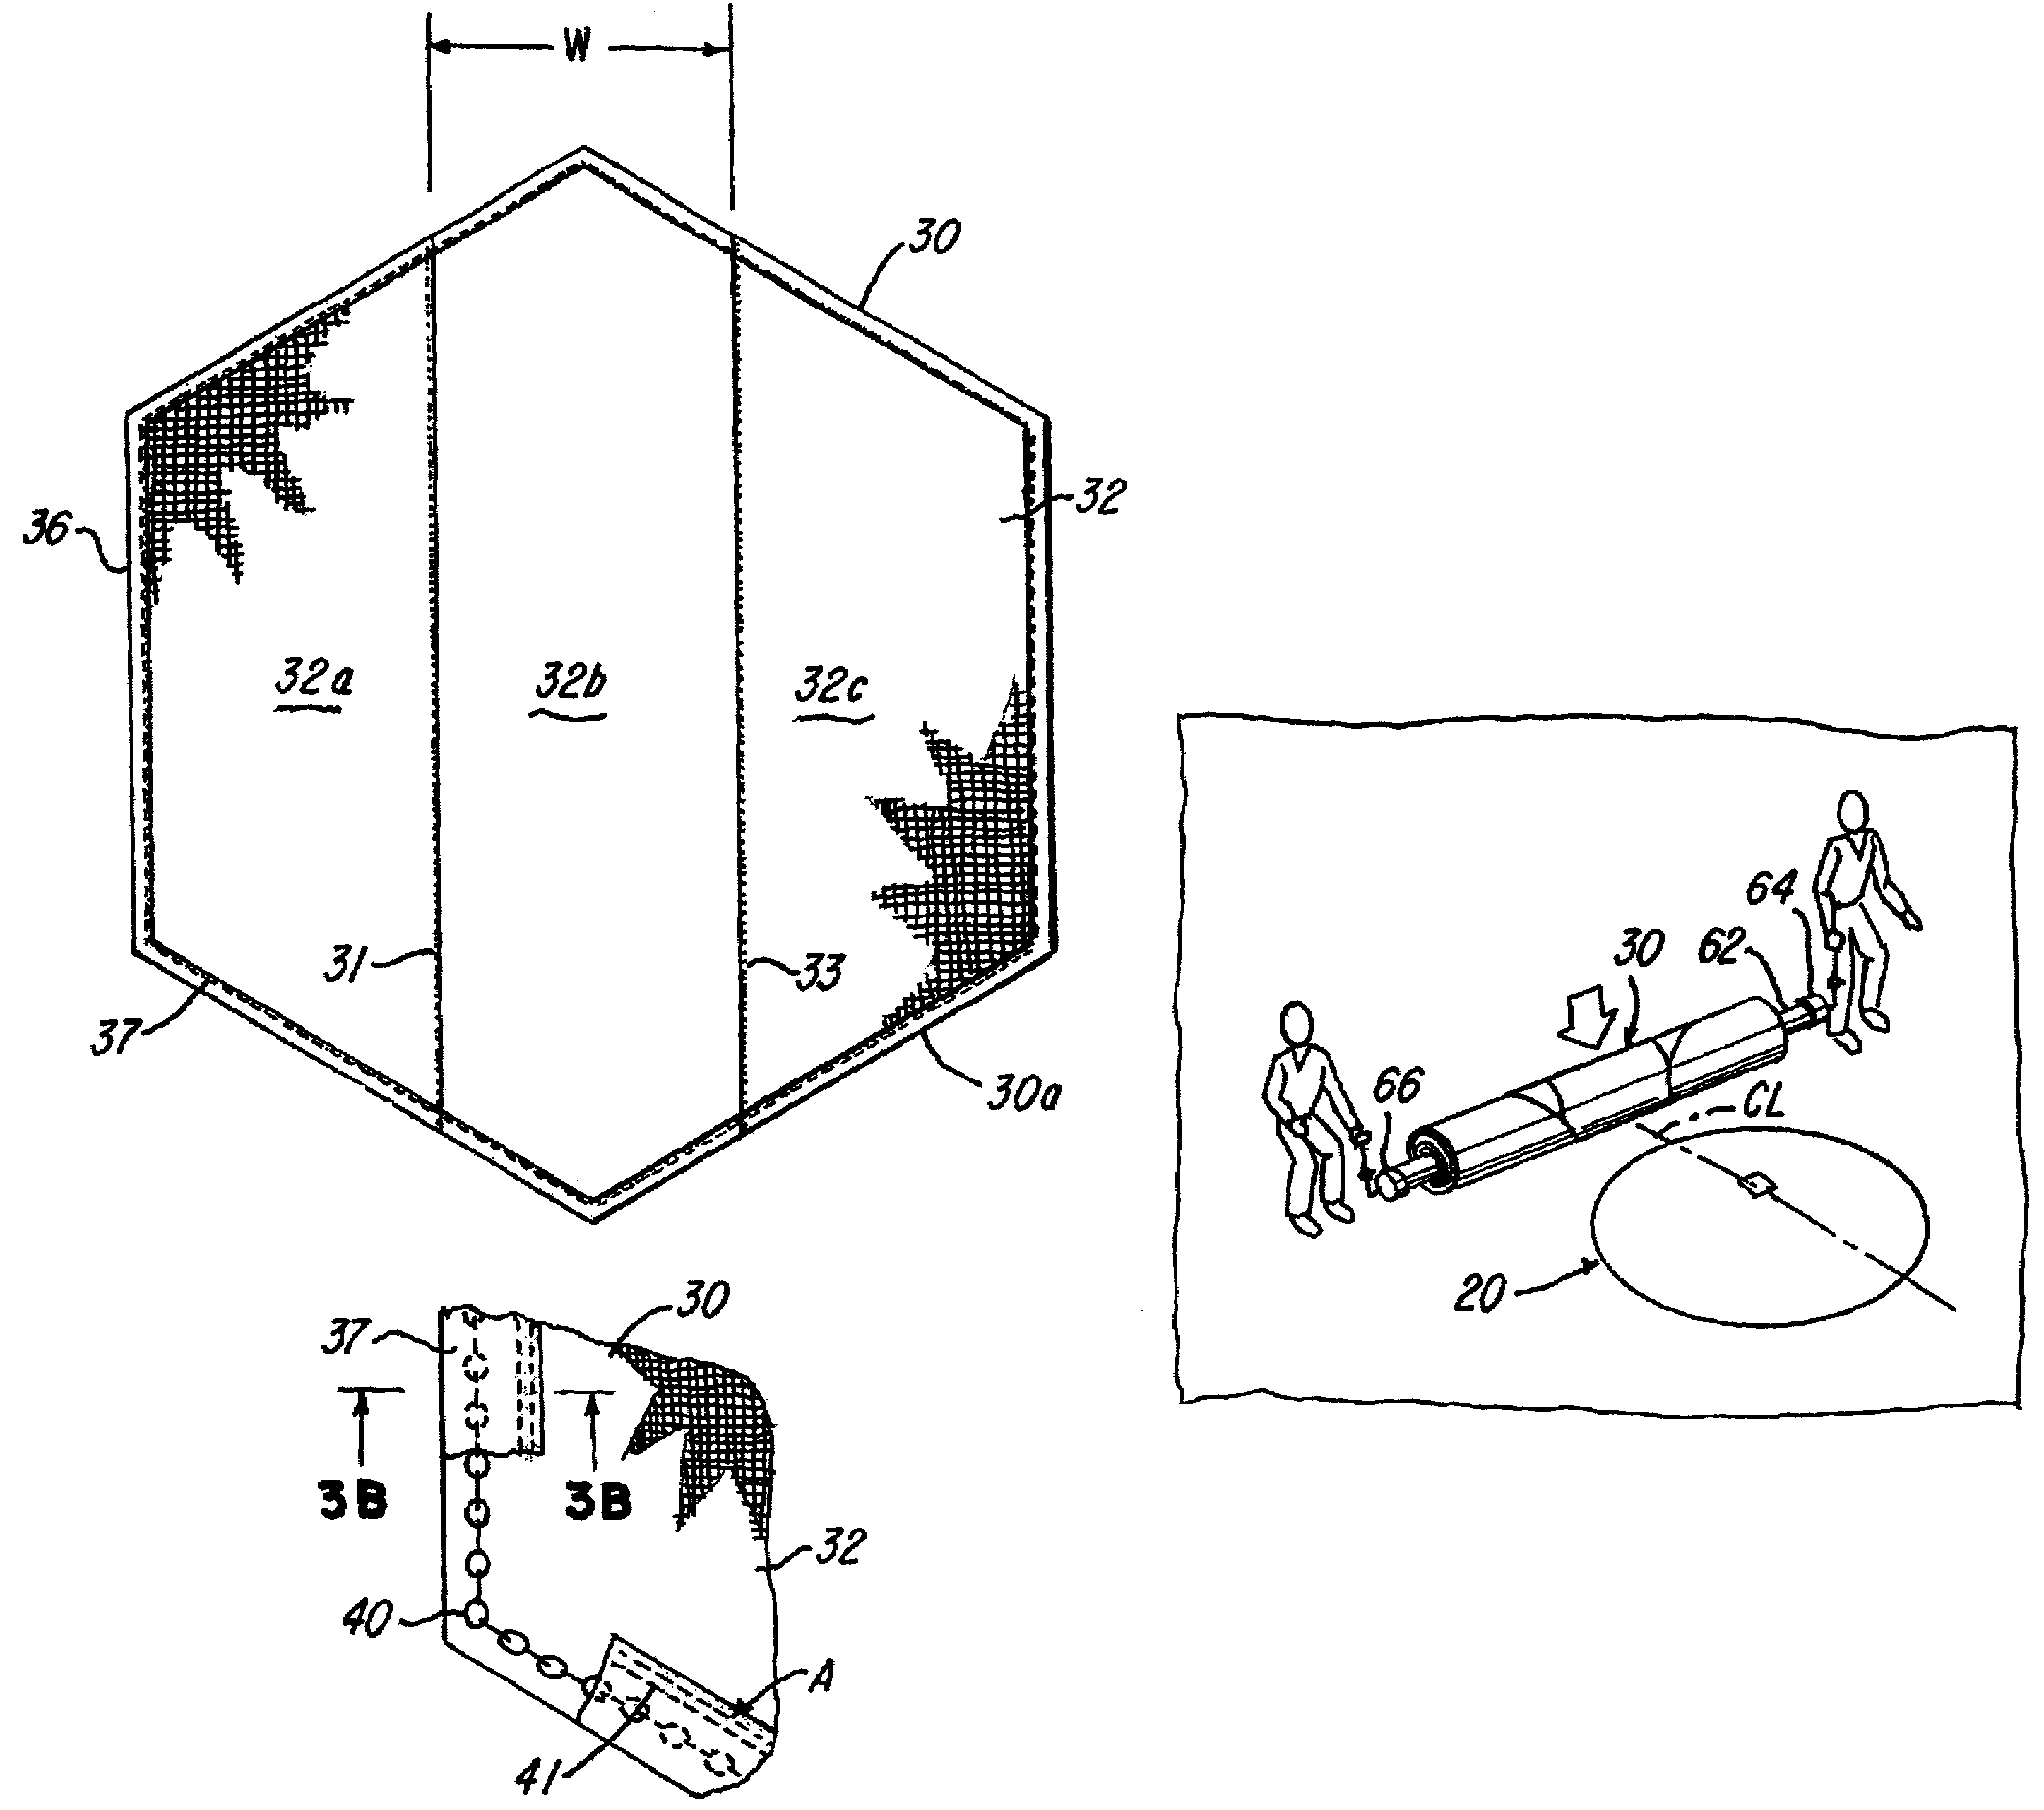 Method for protecting at least one baseball area of a baseball playing field